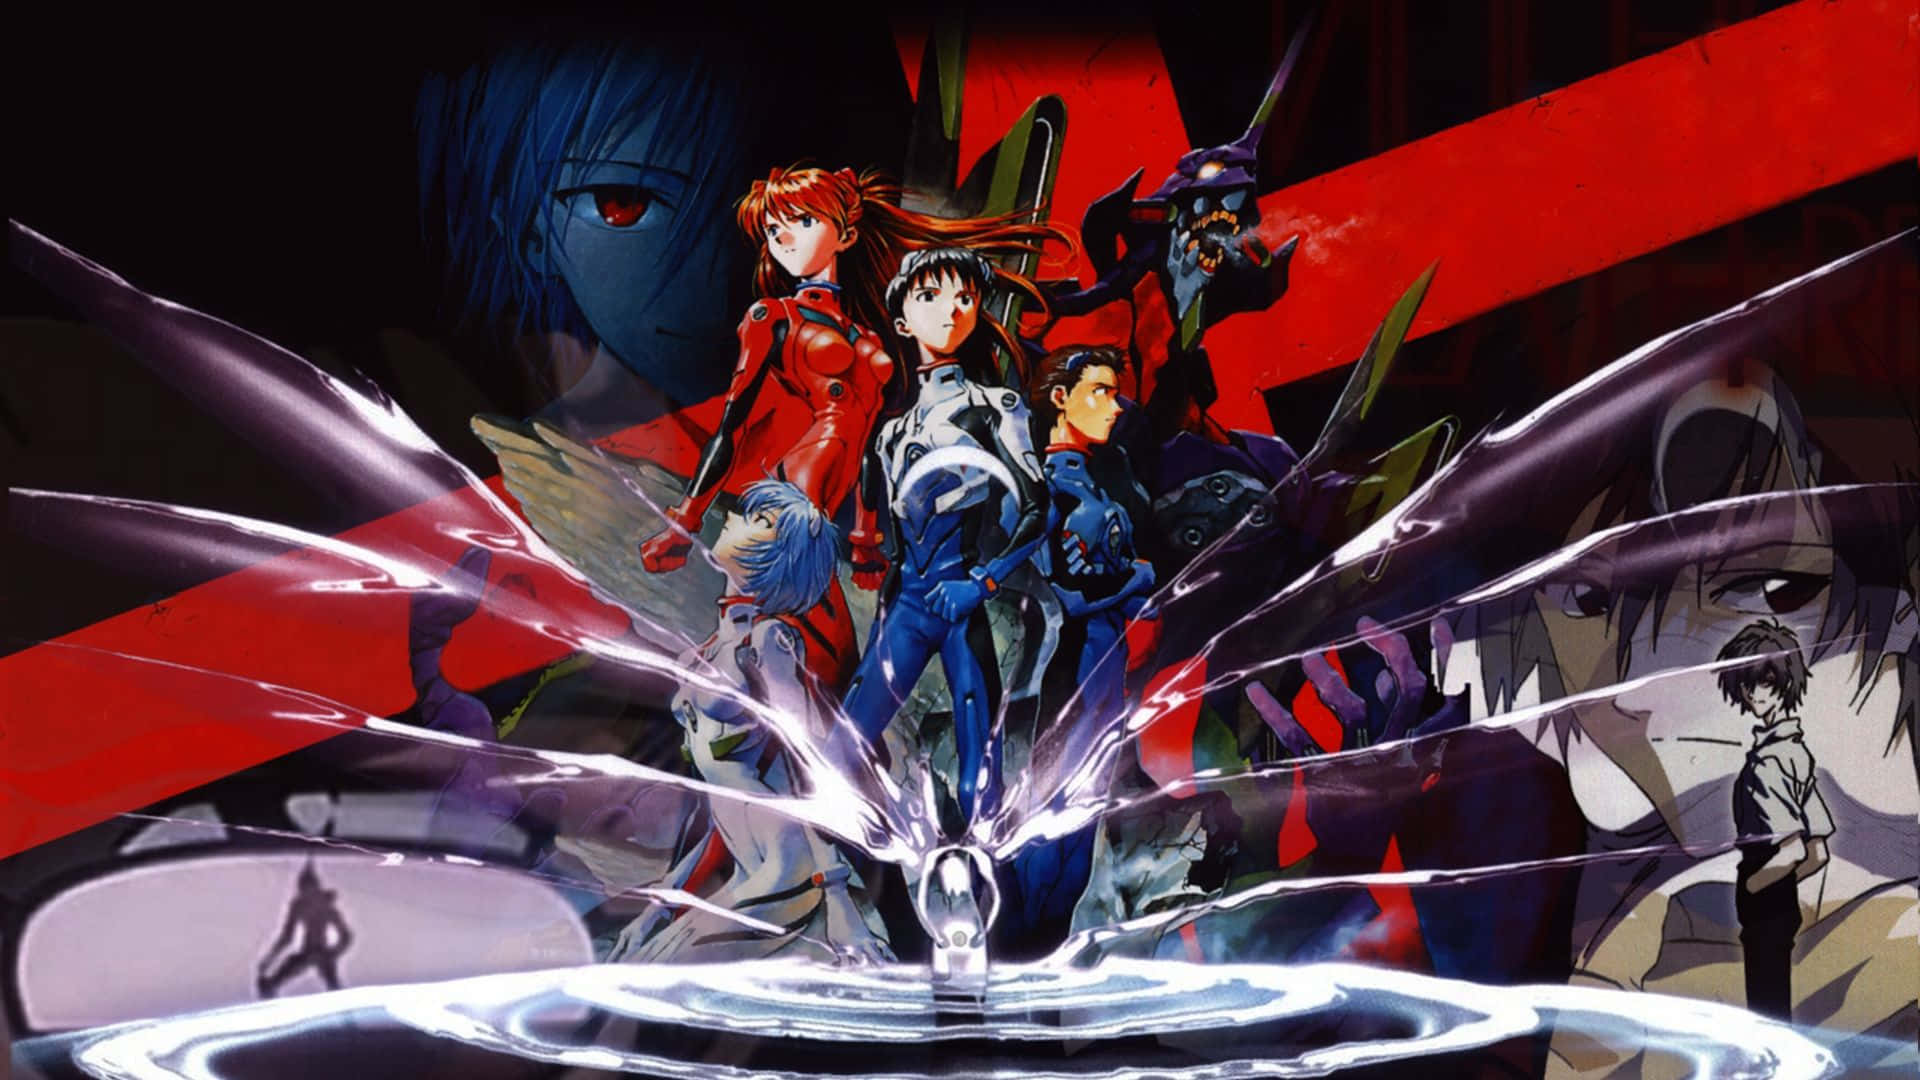 Humanity awakens in a chaotic world of Evangelion